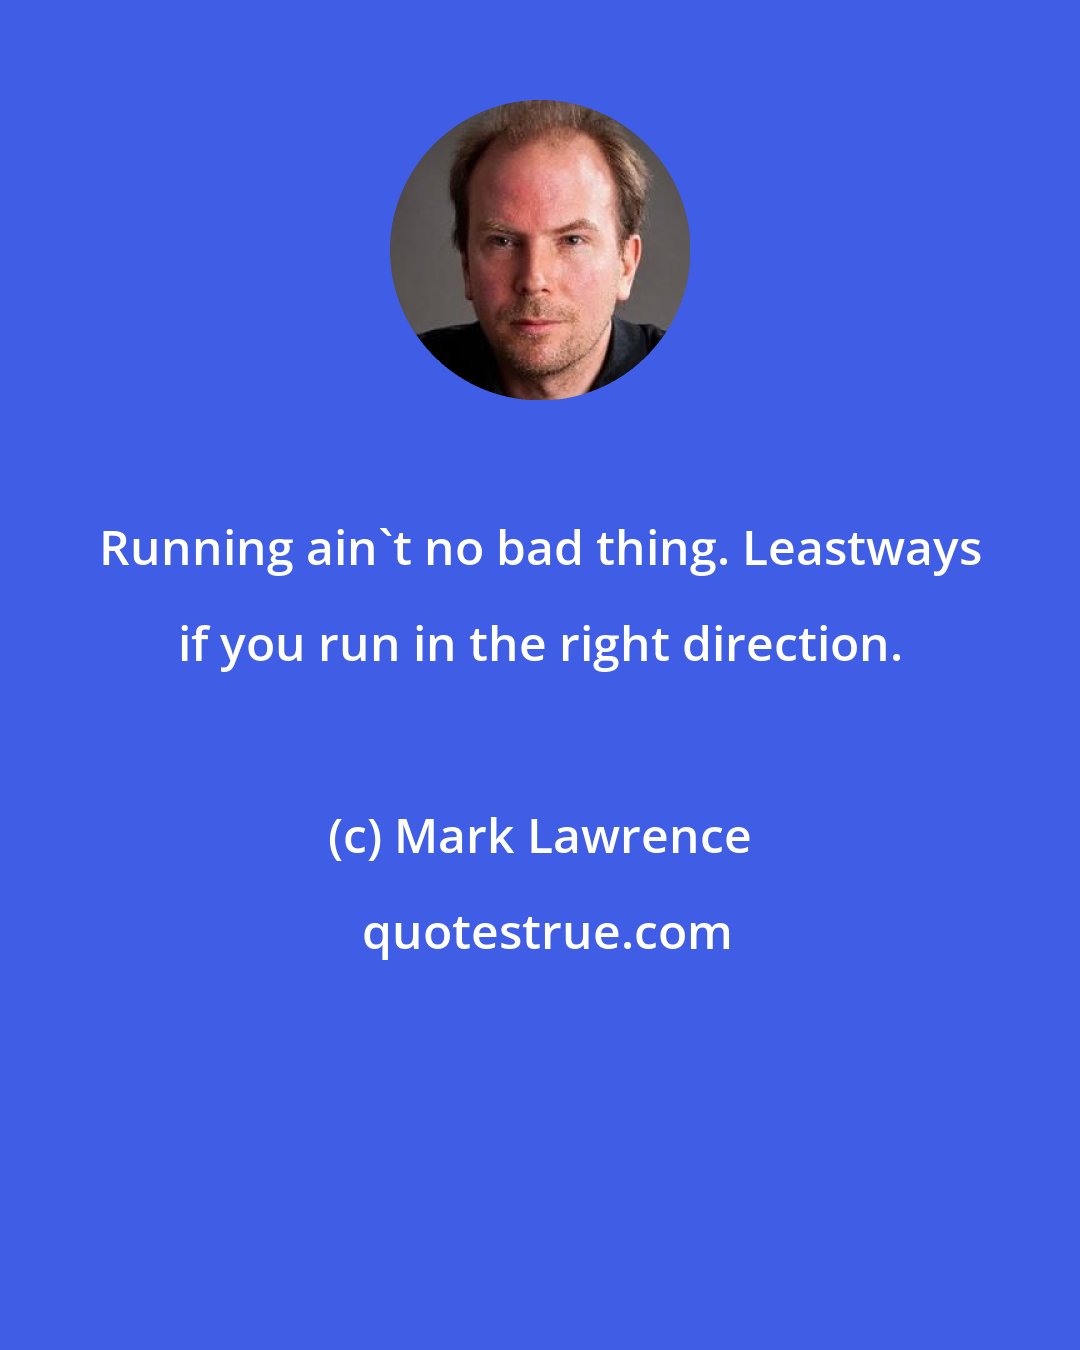 Mark Lawrence: Running ain't no bad thing. Leastways if you run in the right direction.